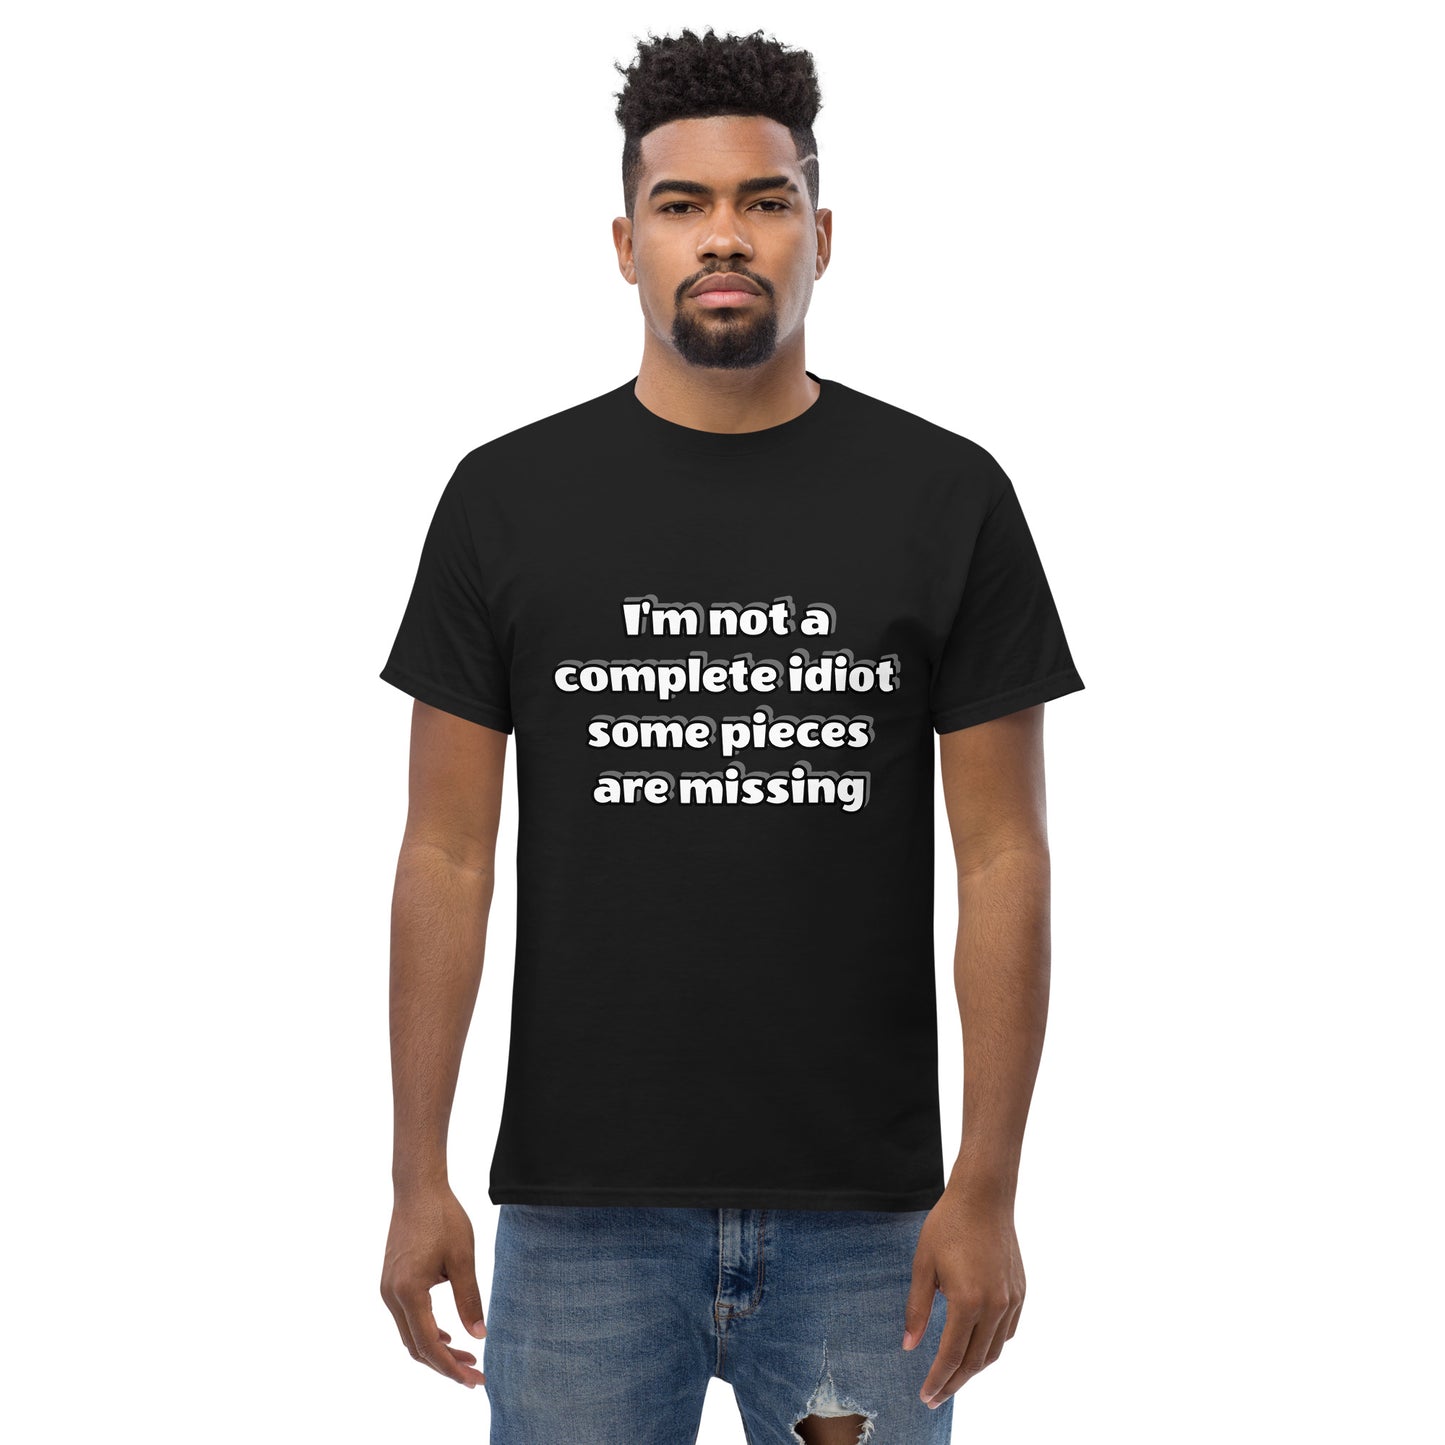 Men with black t-shirt with text “I’m not a complete idiot, some pieces are missing”